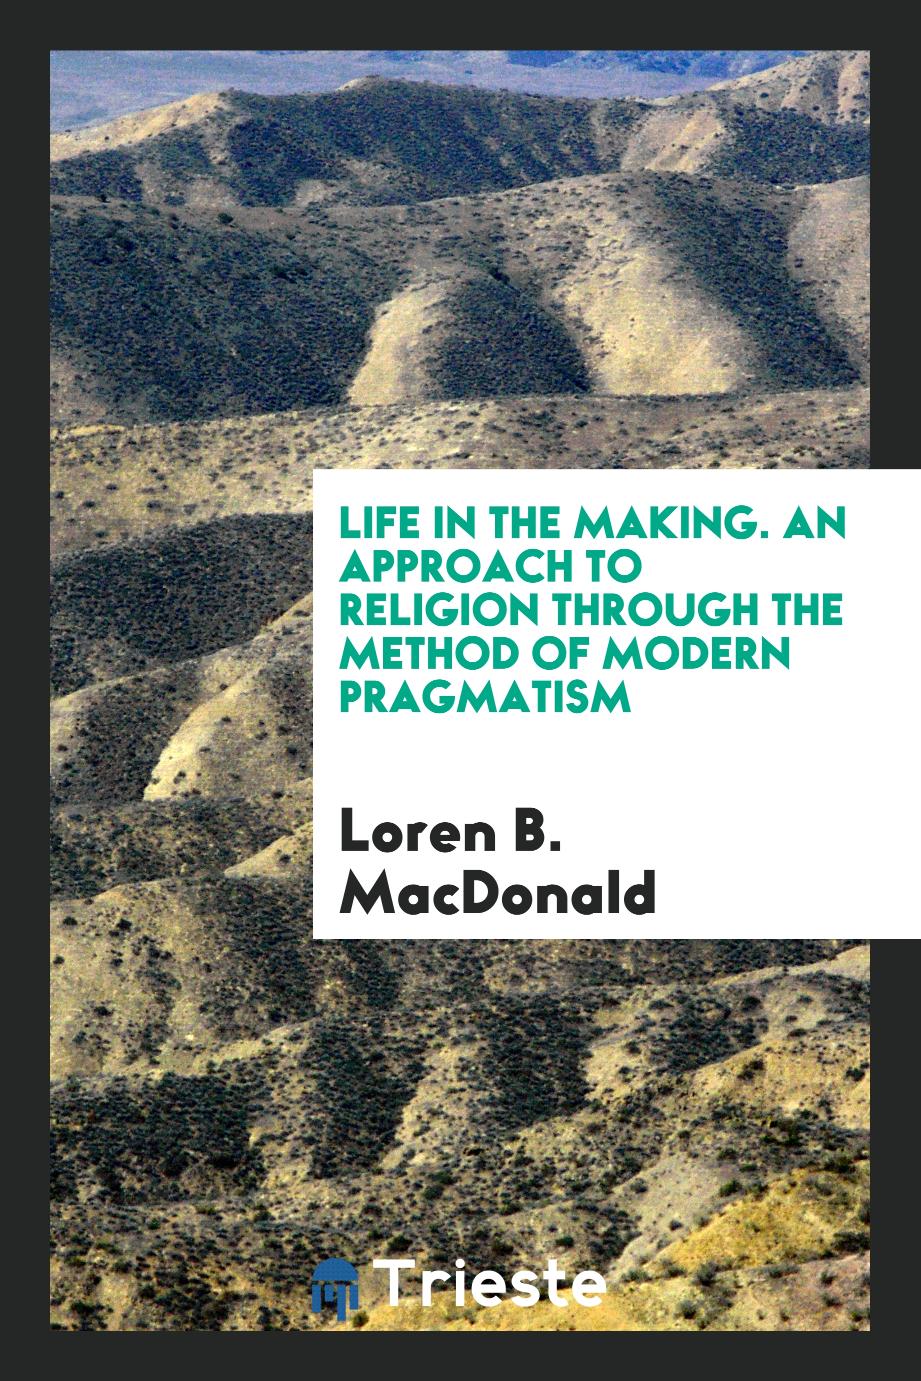 Life in the Making. An Approach to Religion Through the Method of Modern Pragmatism